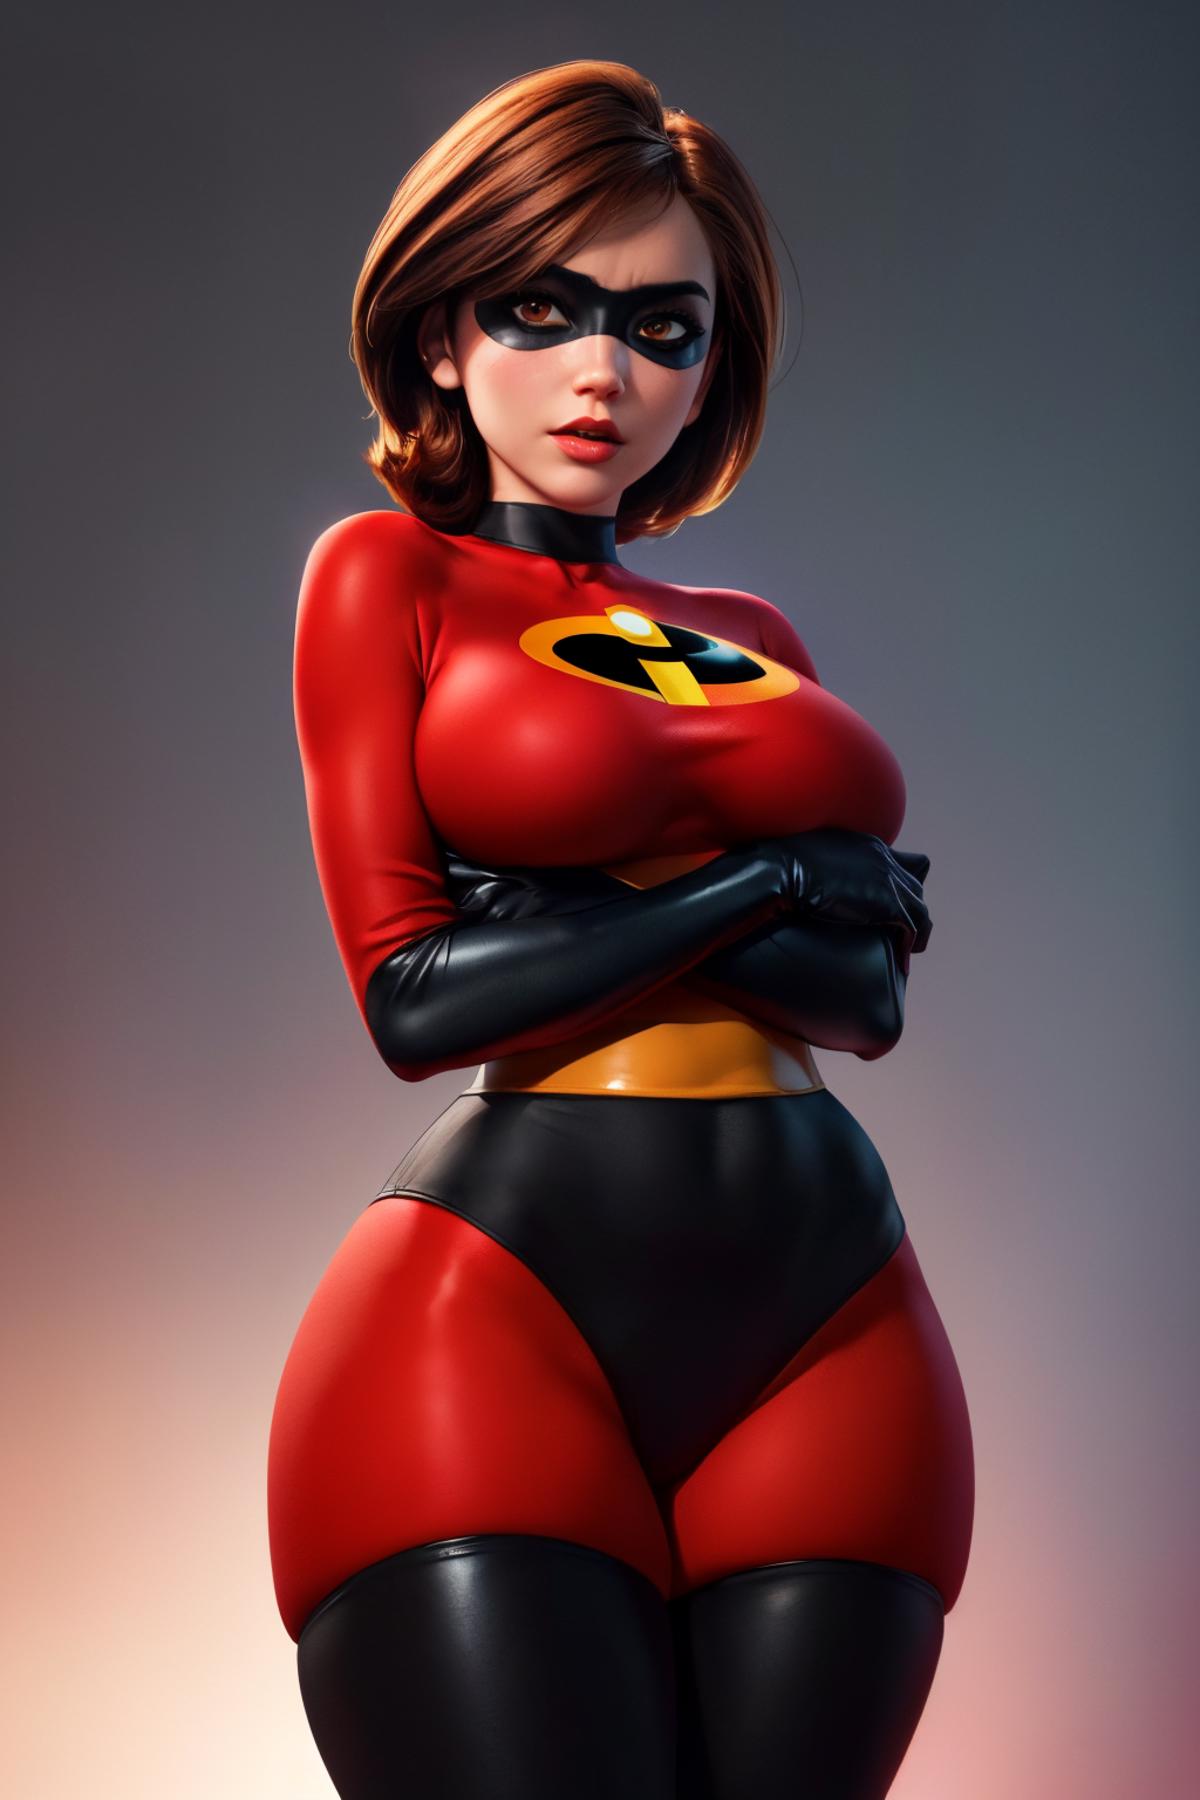 Helen Parr - The Incredibles - Character LORA image by iJWiTGS8